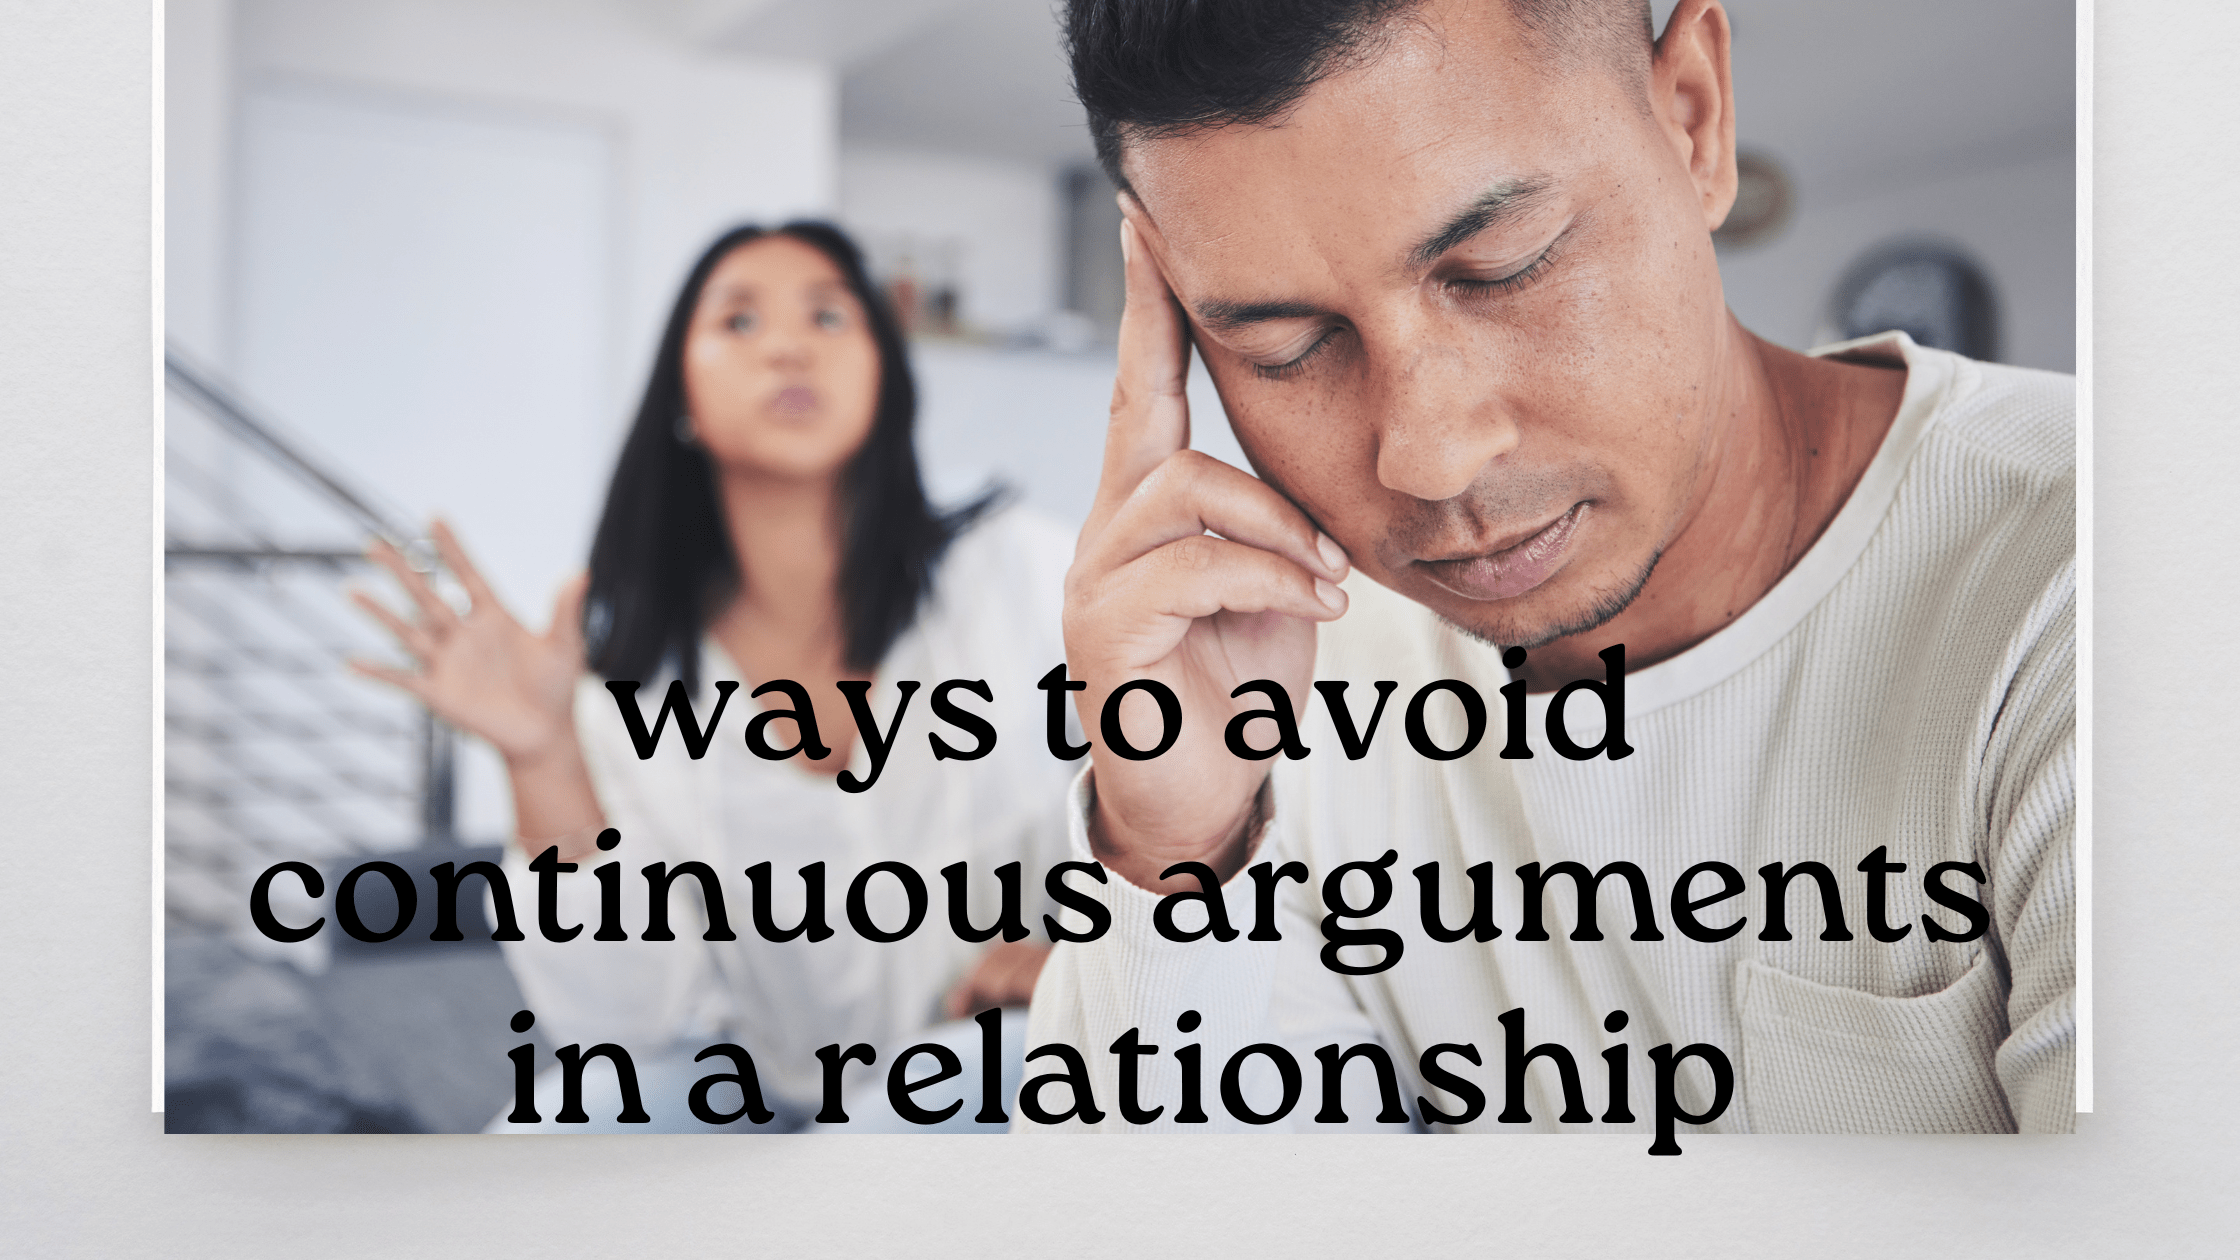 10 easy ways to avoid continuous arguments in a relationship 47